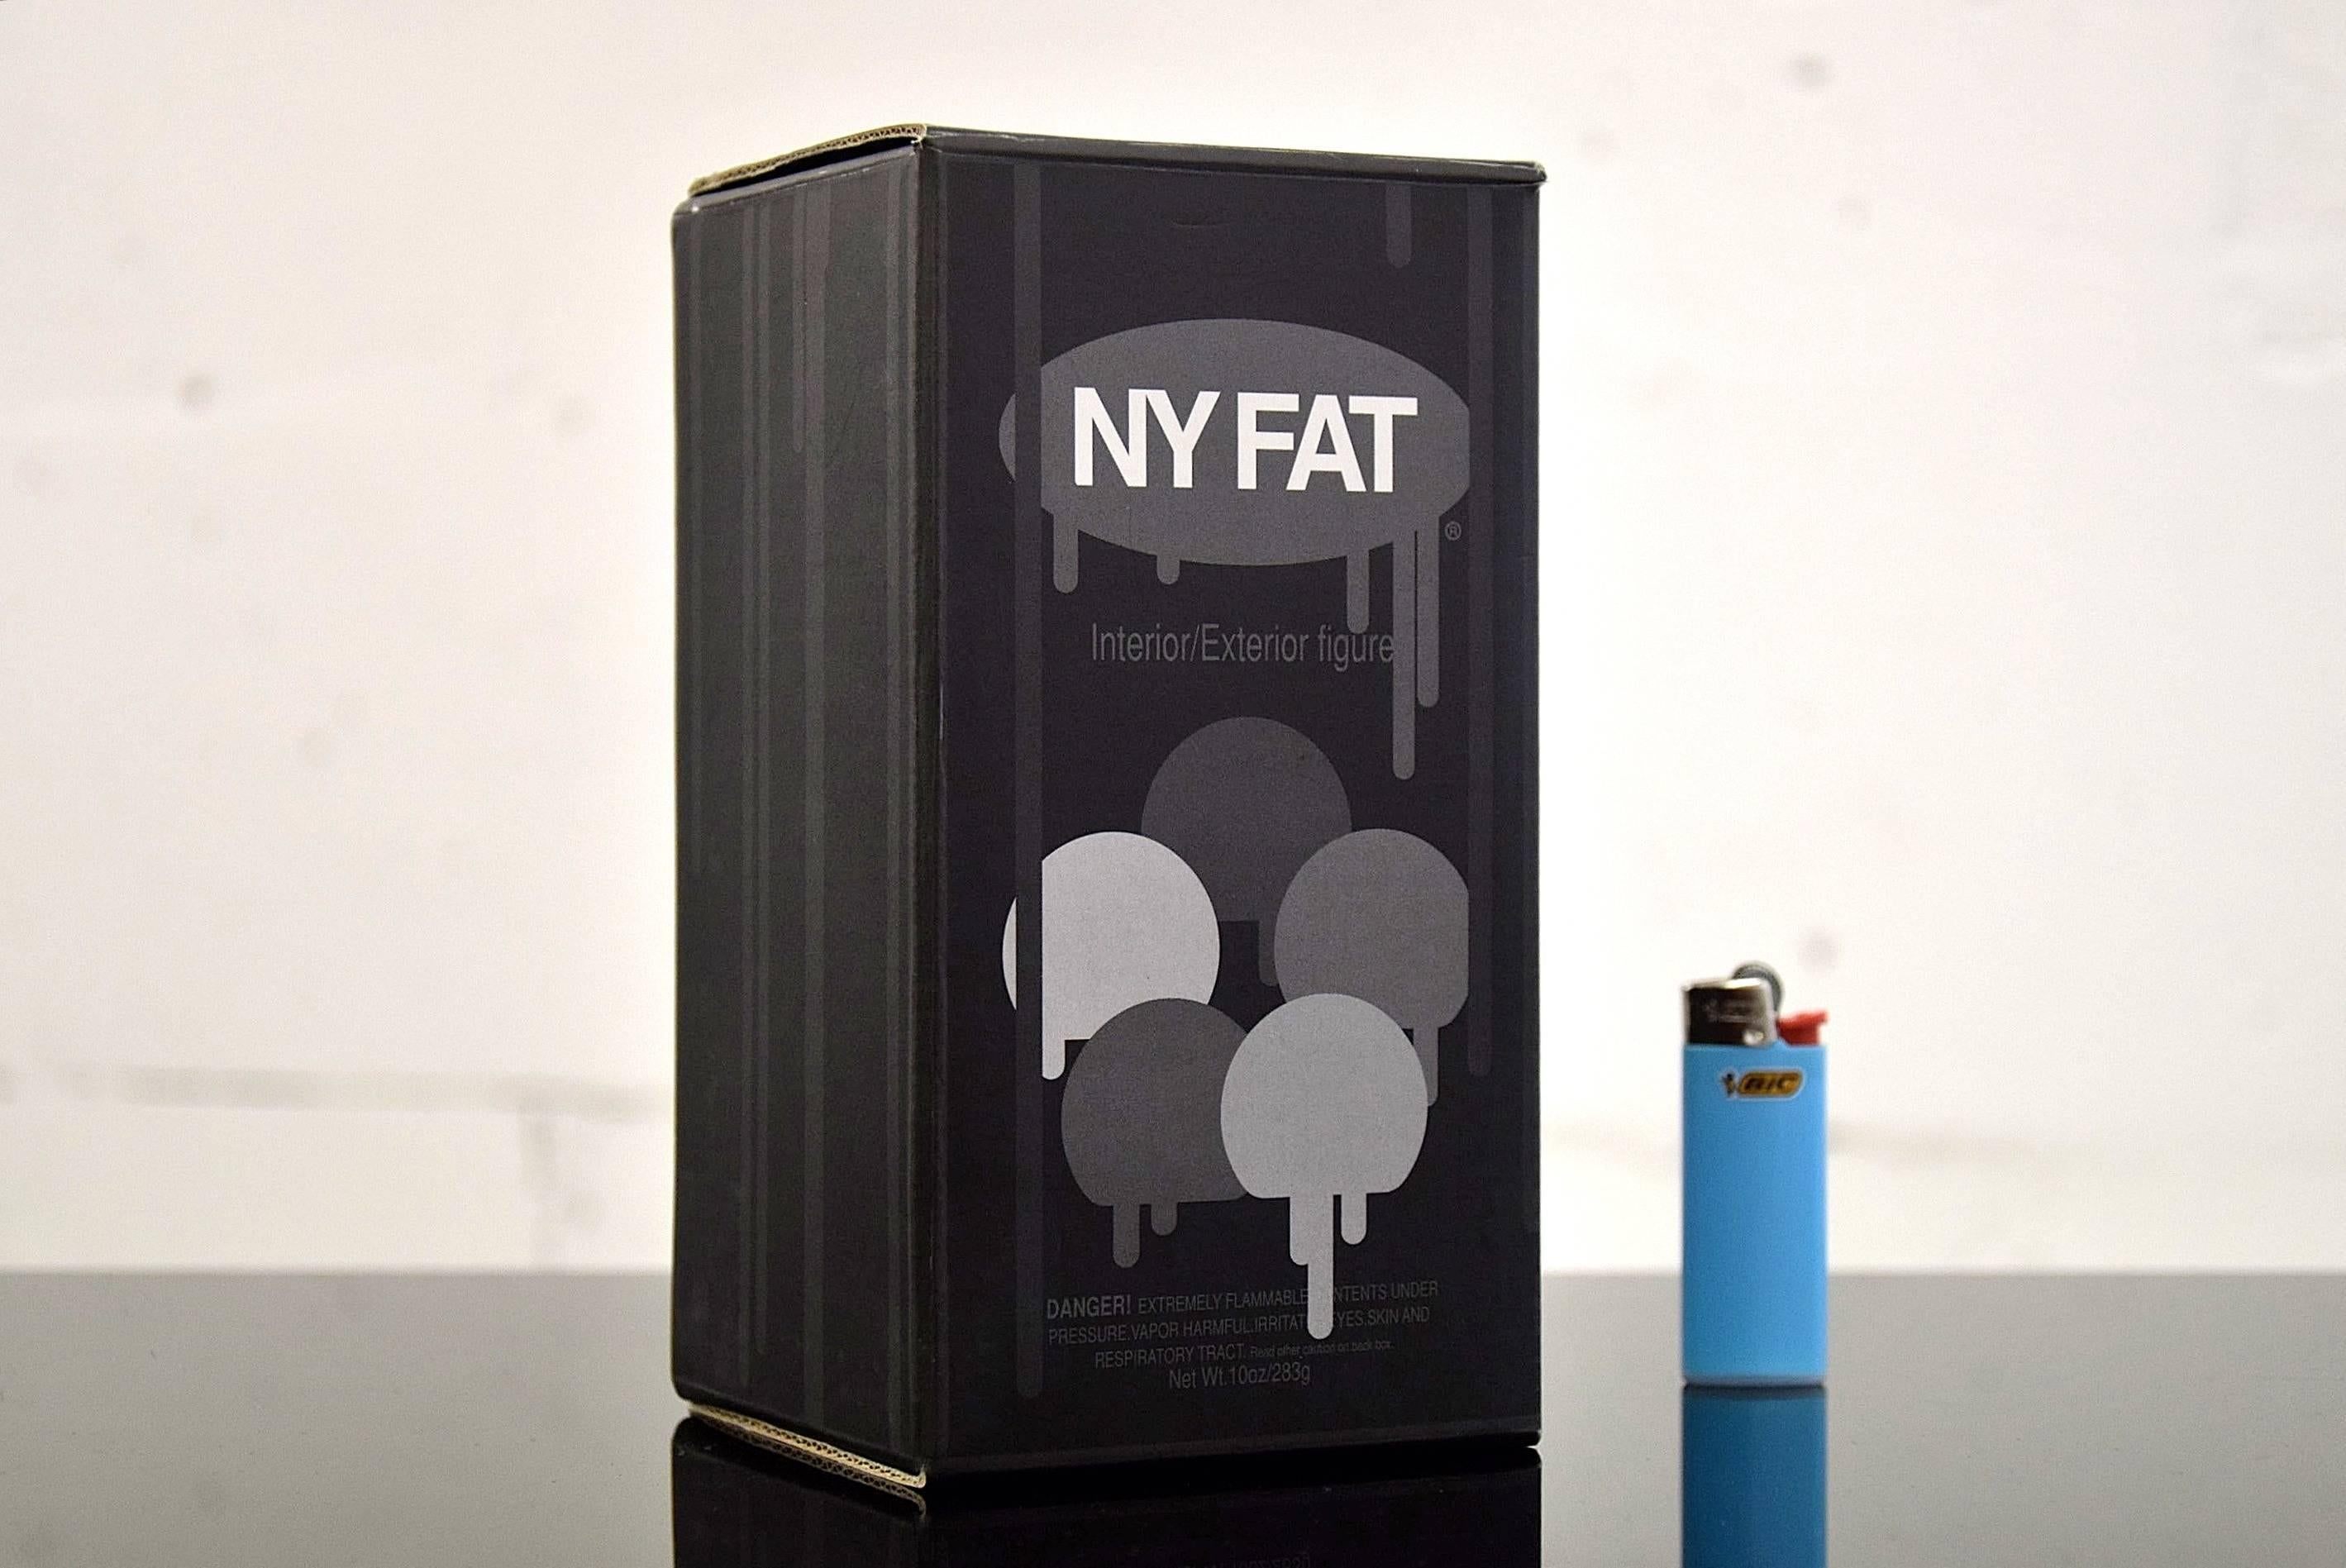 2005 designer toy NY Fat by Michael Lau

Rare vinyl figure, NY Fat shock, in new old stock condition created by Michael Lau for a very limited edition casio shock wristwatch (for sale separate). 

Figure is in new old stock